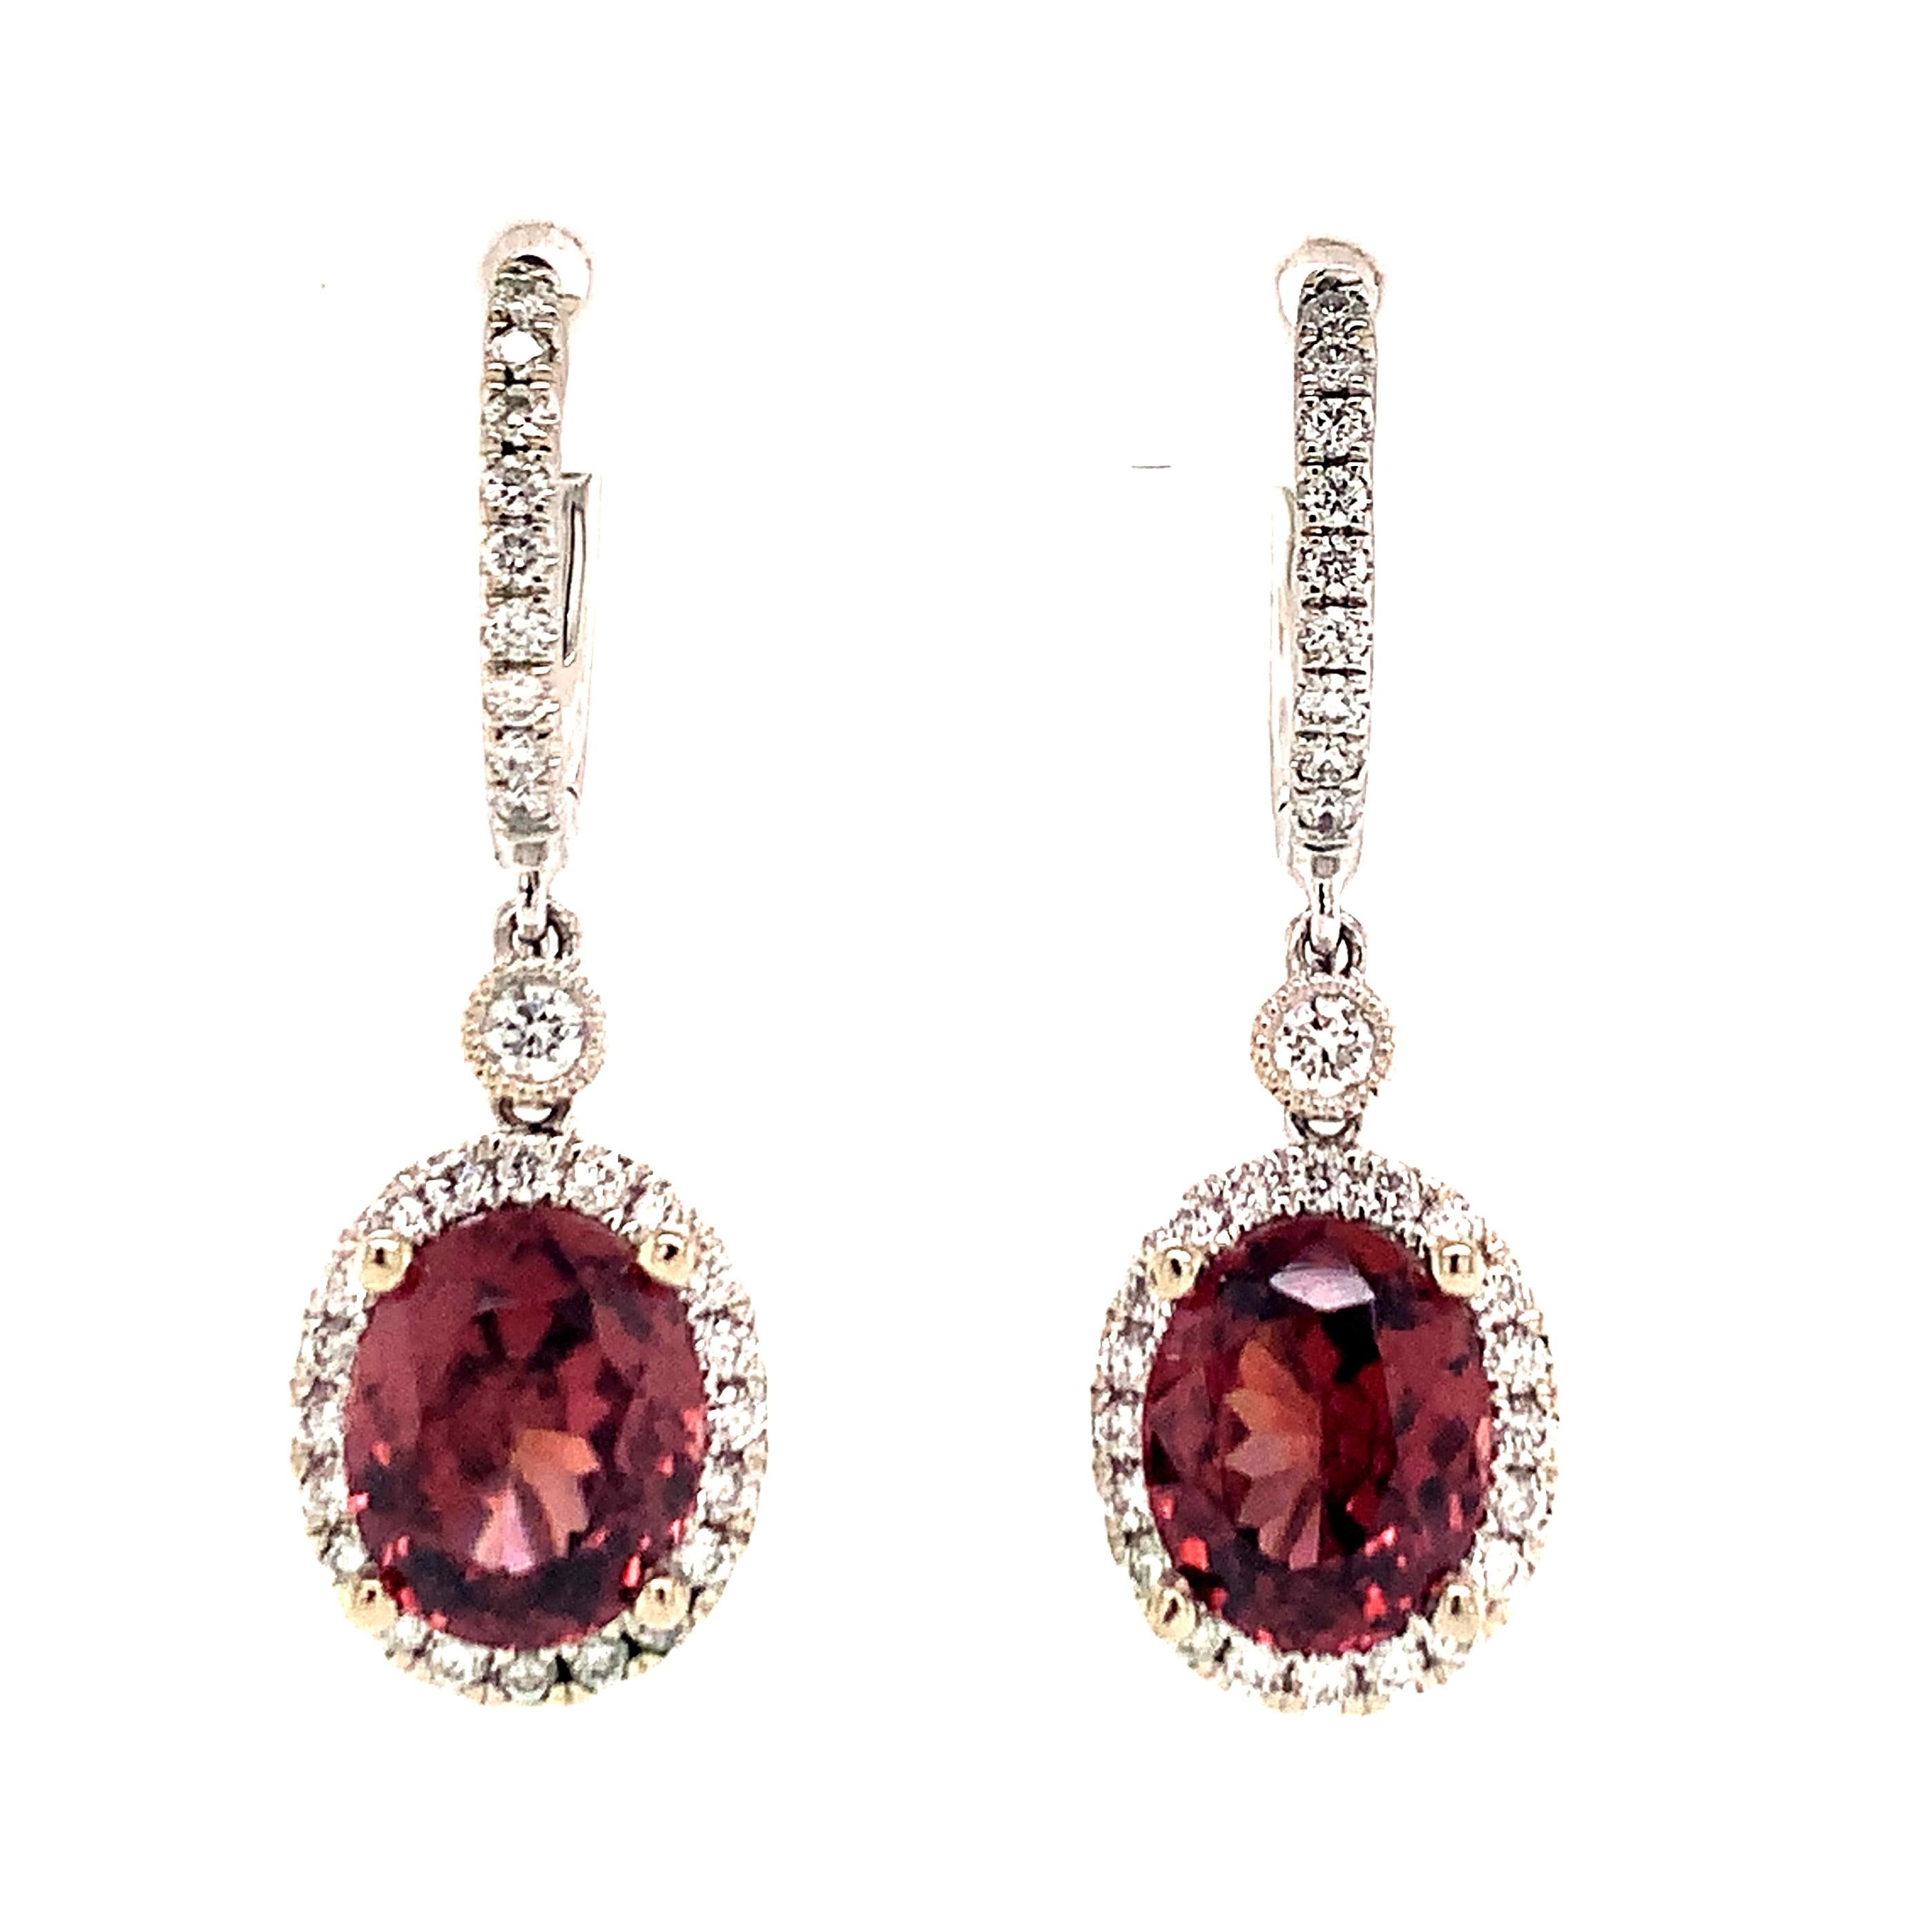 Natural Tourmaline Rubellite Diamond Earrings 18k Gold 6.62 TCW Certified In New Condition For Sale In Brooklyn, NY